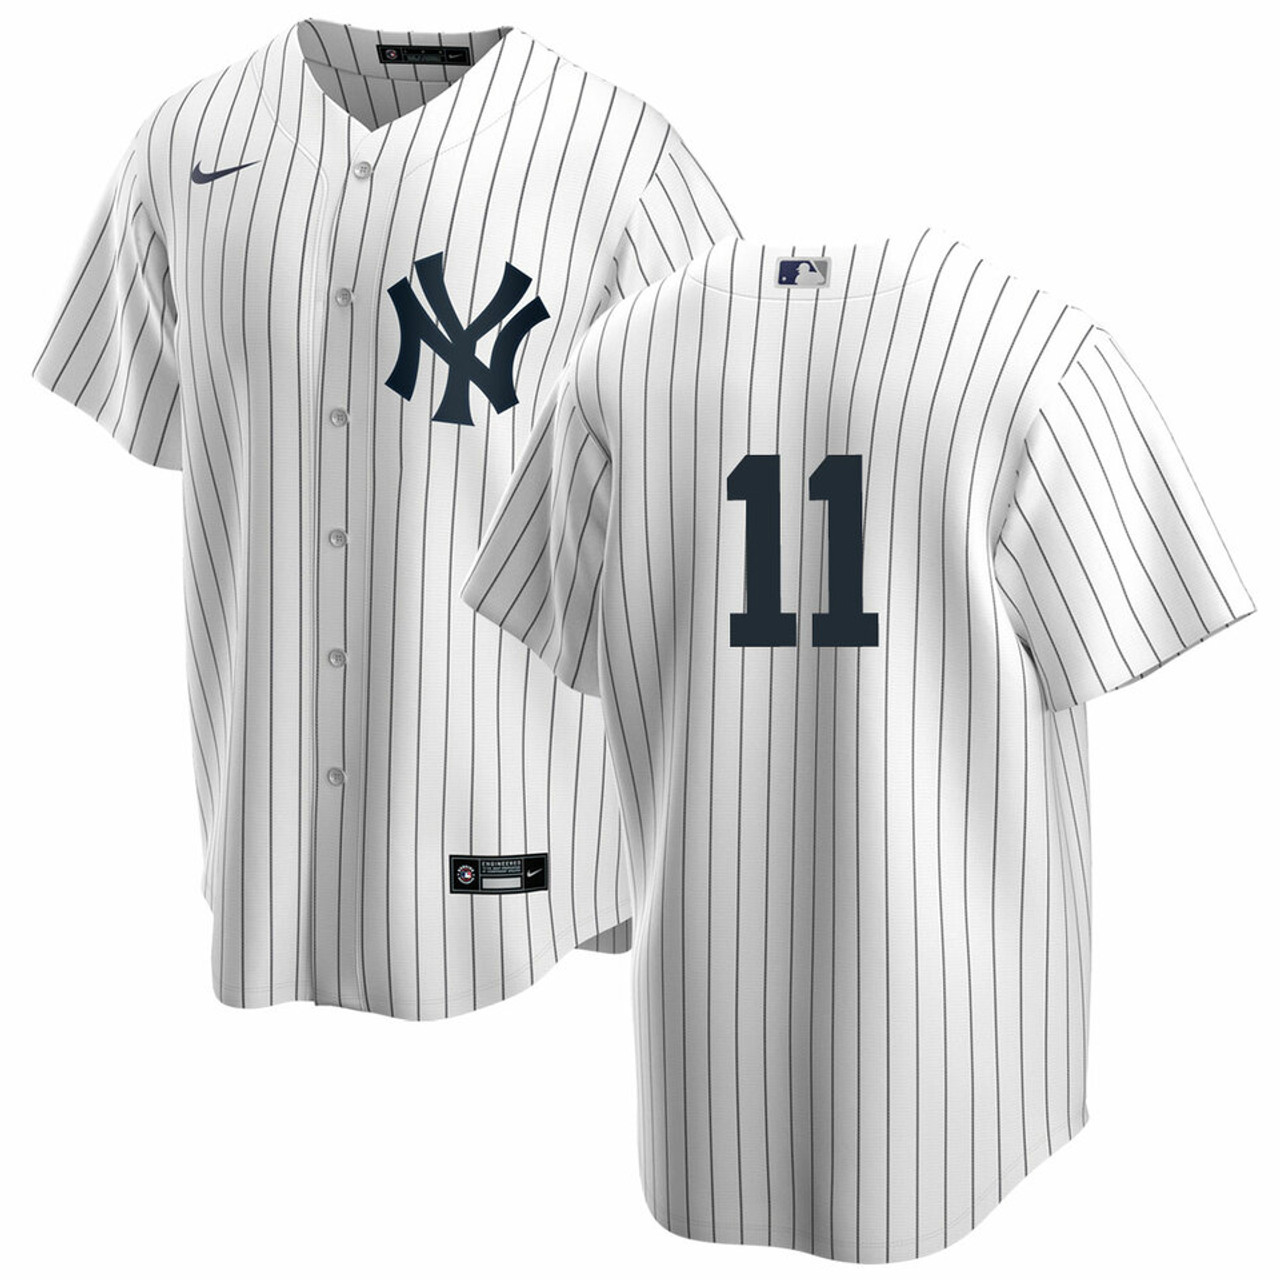 Nike New York Yankees Infant Official Blank Jersey